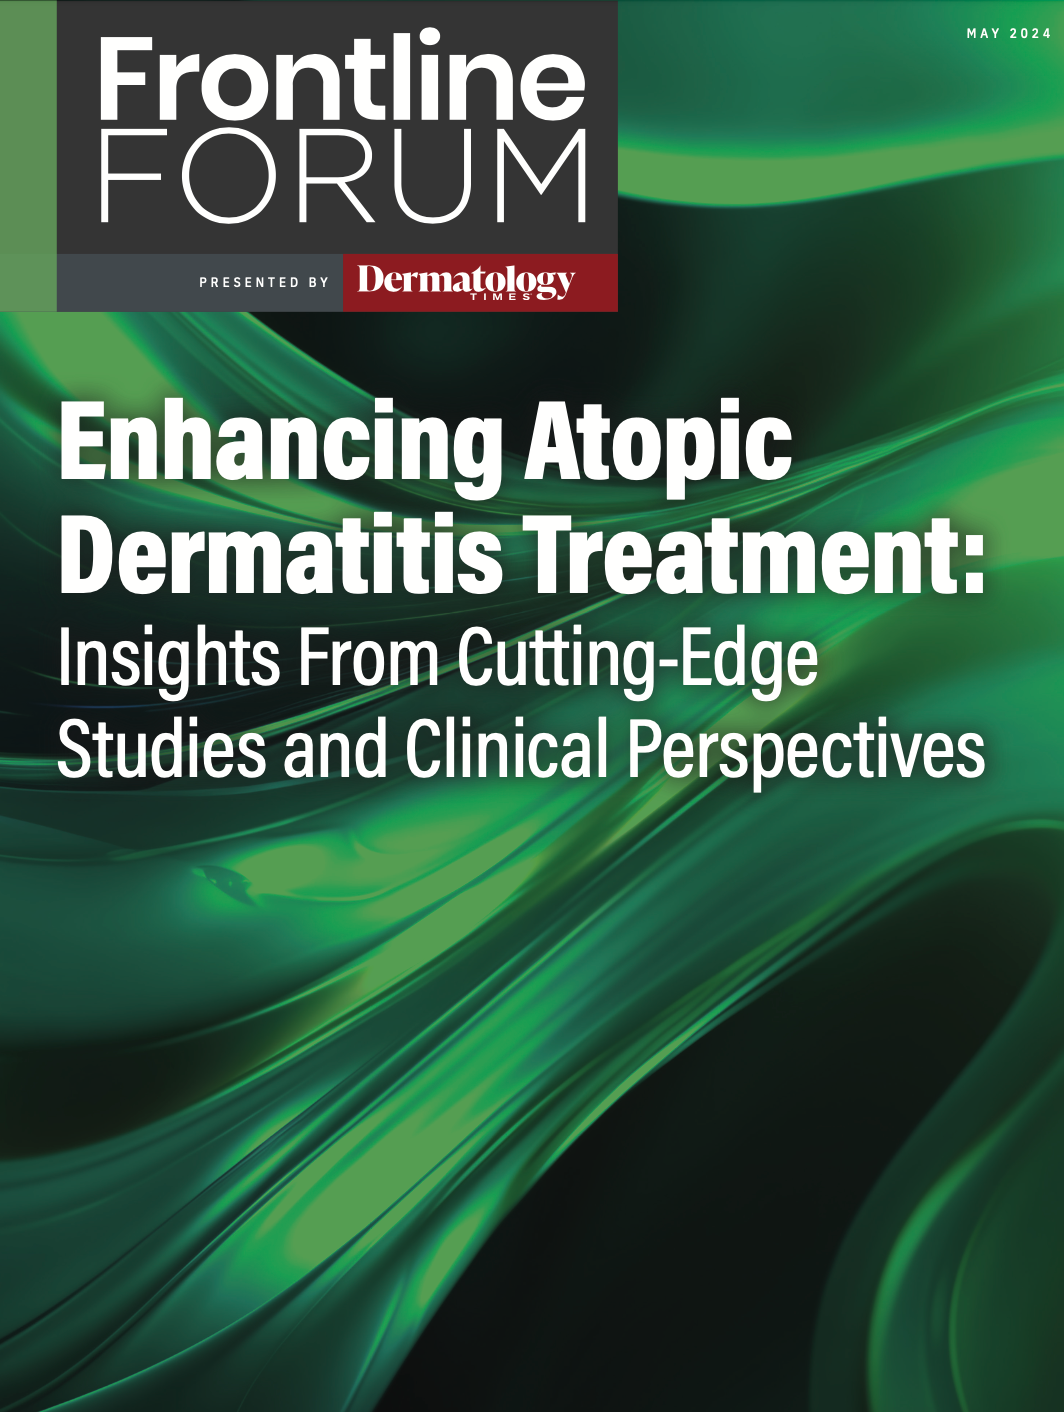 Enhancing Atopic Dermatitis Treatment: Insights From Cutting-Edge Studies and Clinical Perspectives Part 2